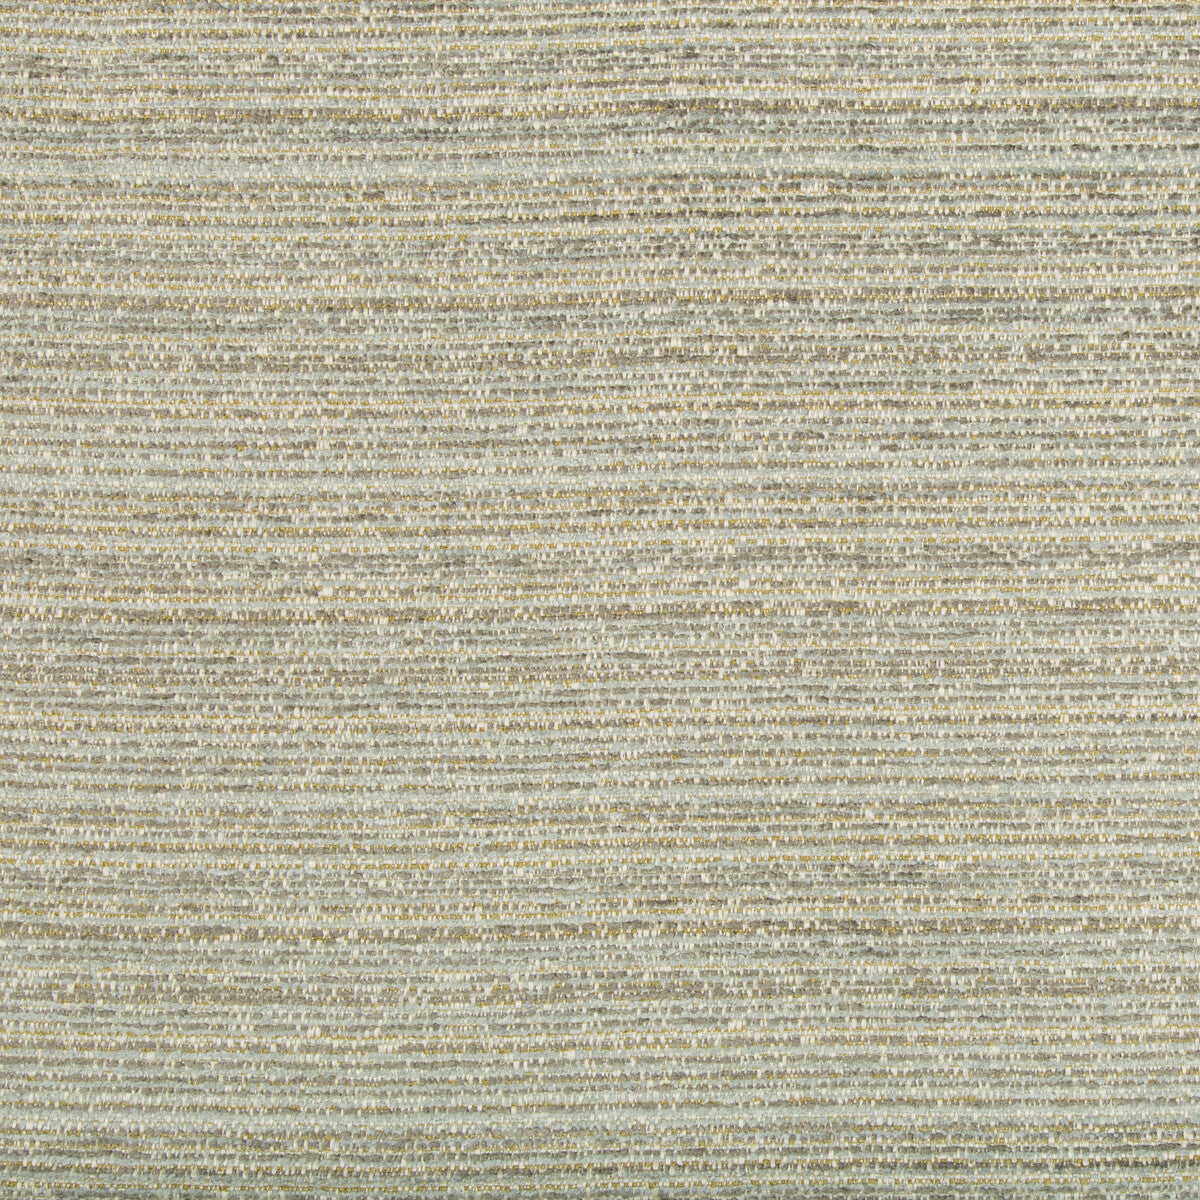 Kravet Design fabric in 34995-1523 color - pattern 34995.1523.0 - by Kravet Design in the Performance Crypton Home collection